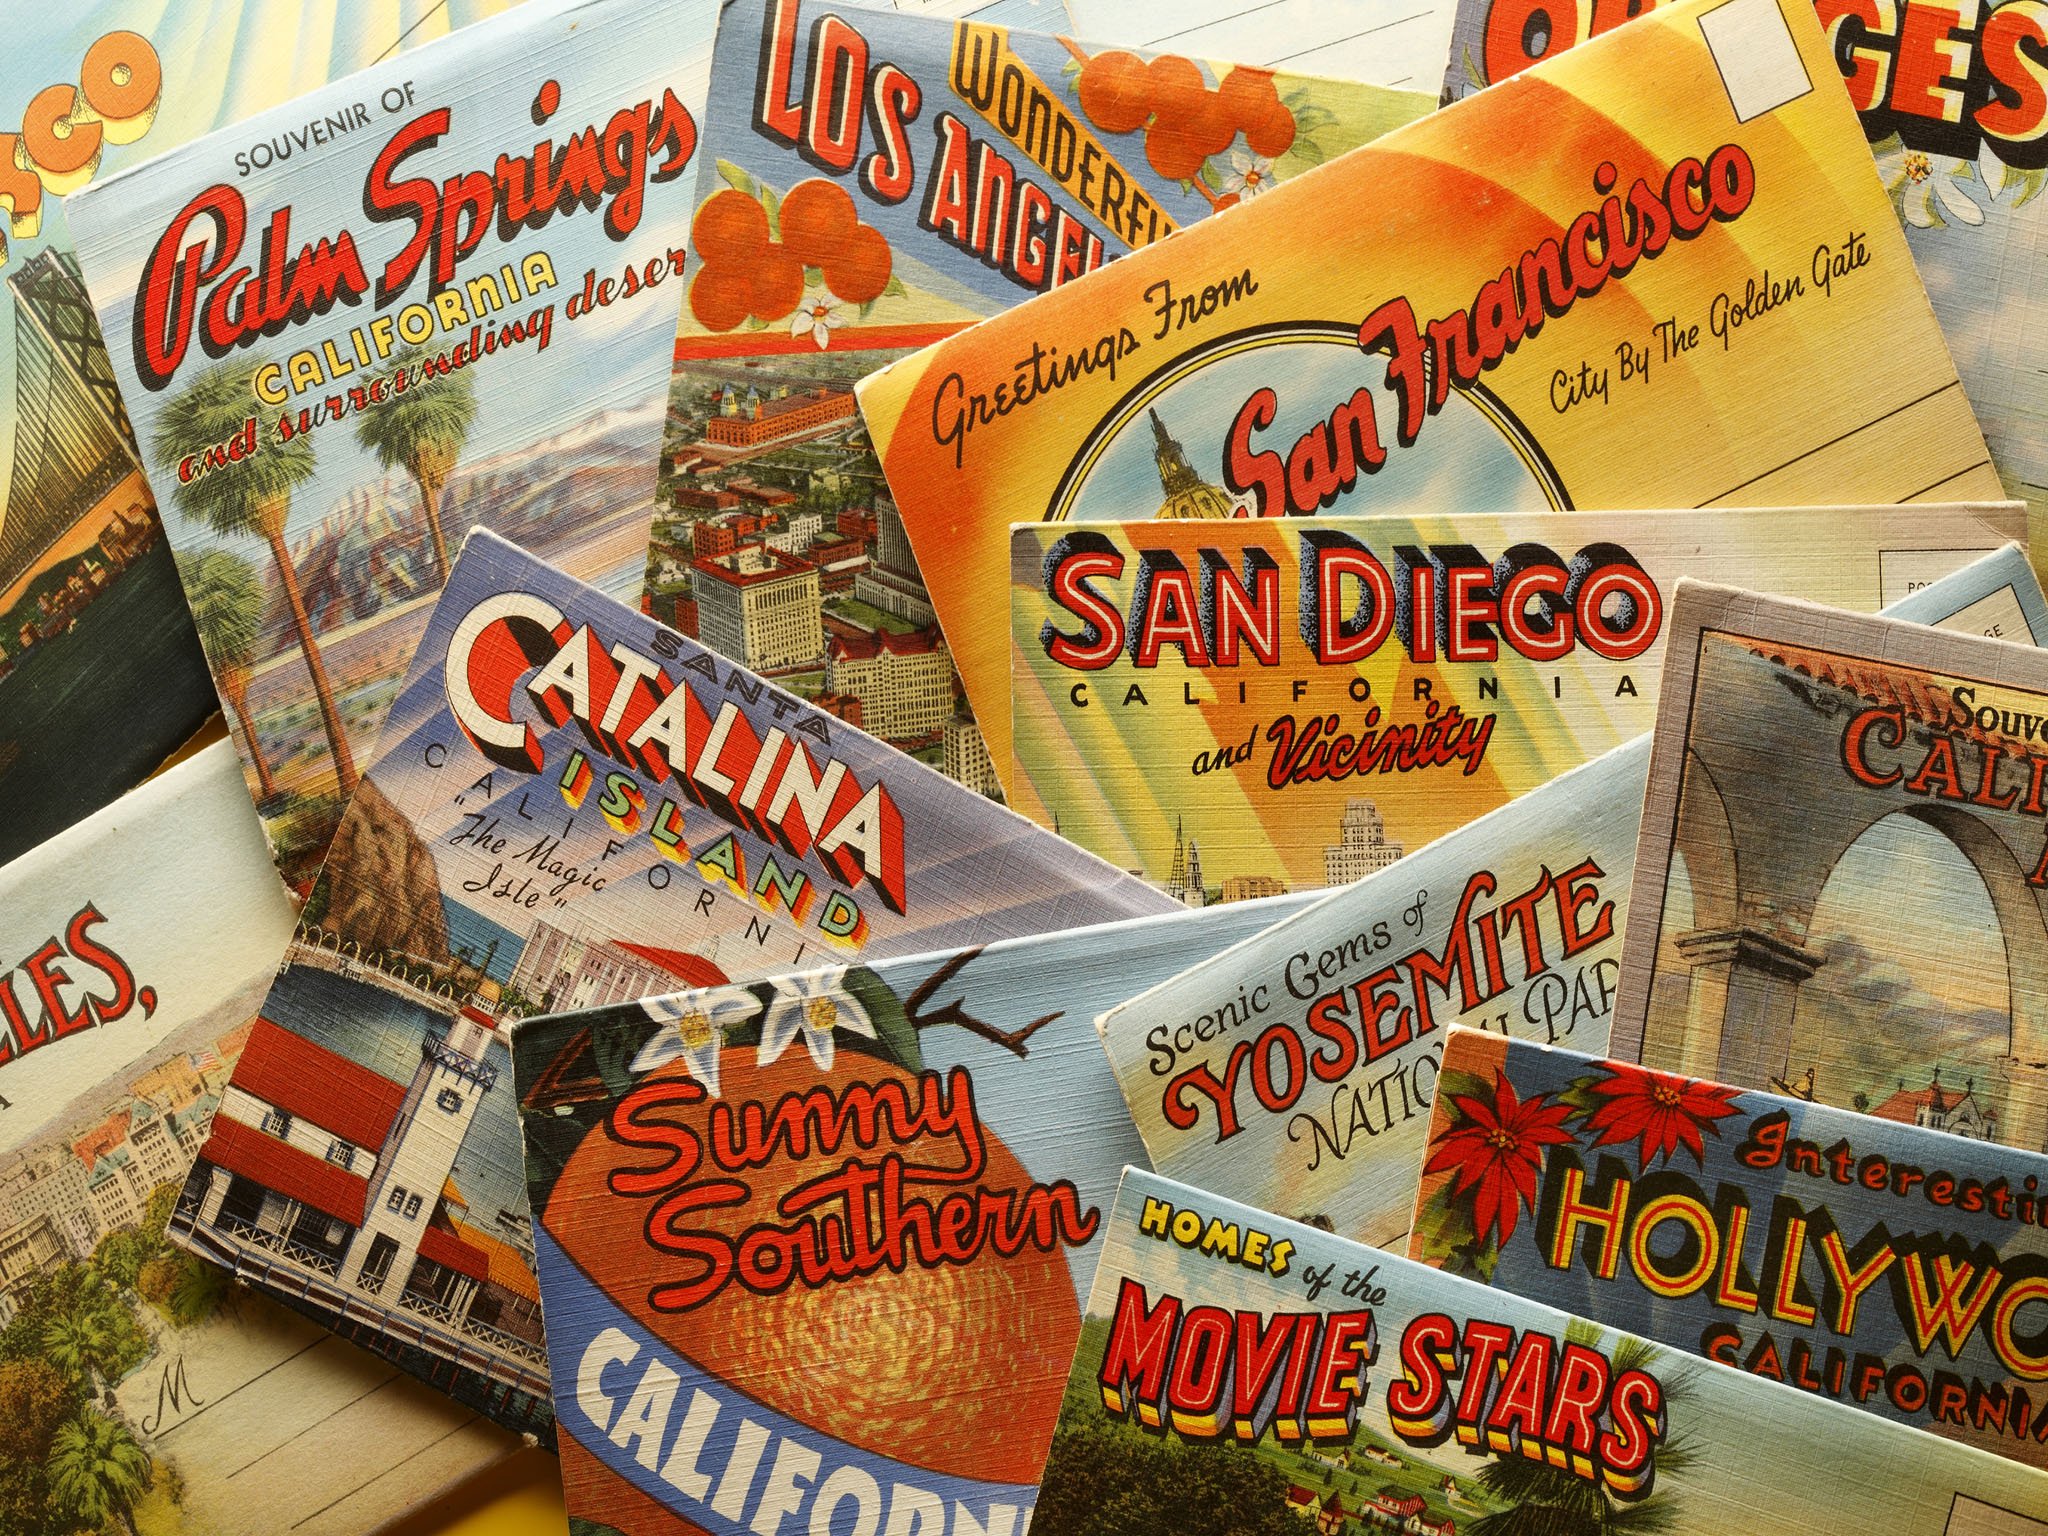 San Diego, California, USA - November 8, 2013: A group of vintage postcards showing various California tourist destinations. Shot in a studio setting on a yellow background.